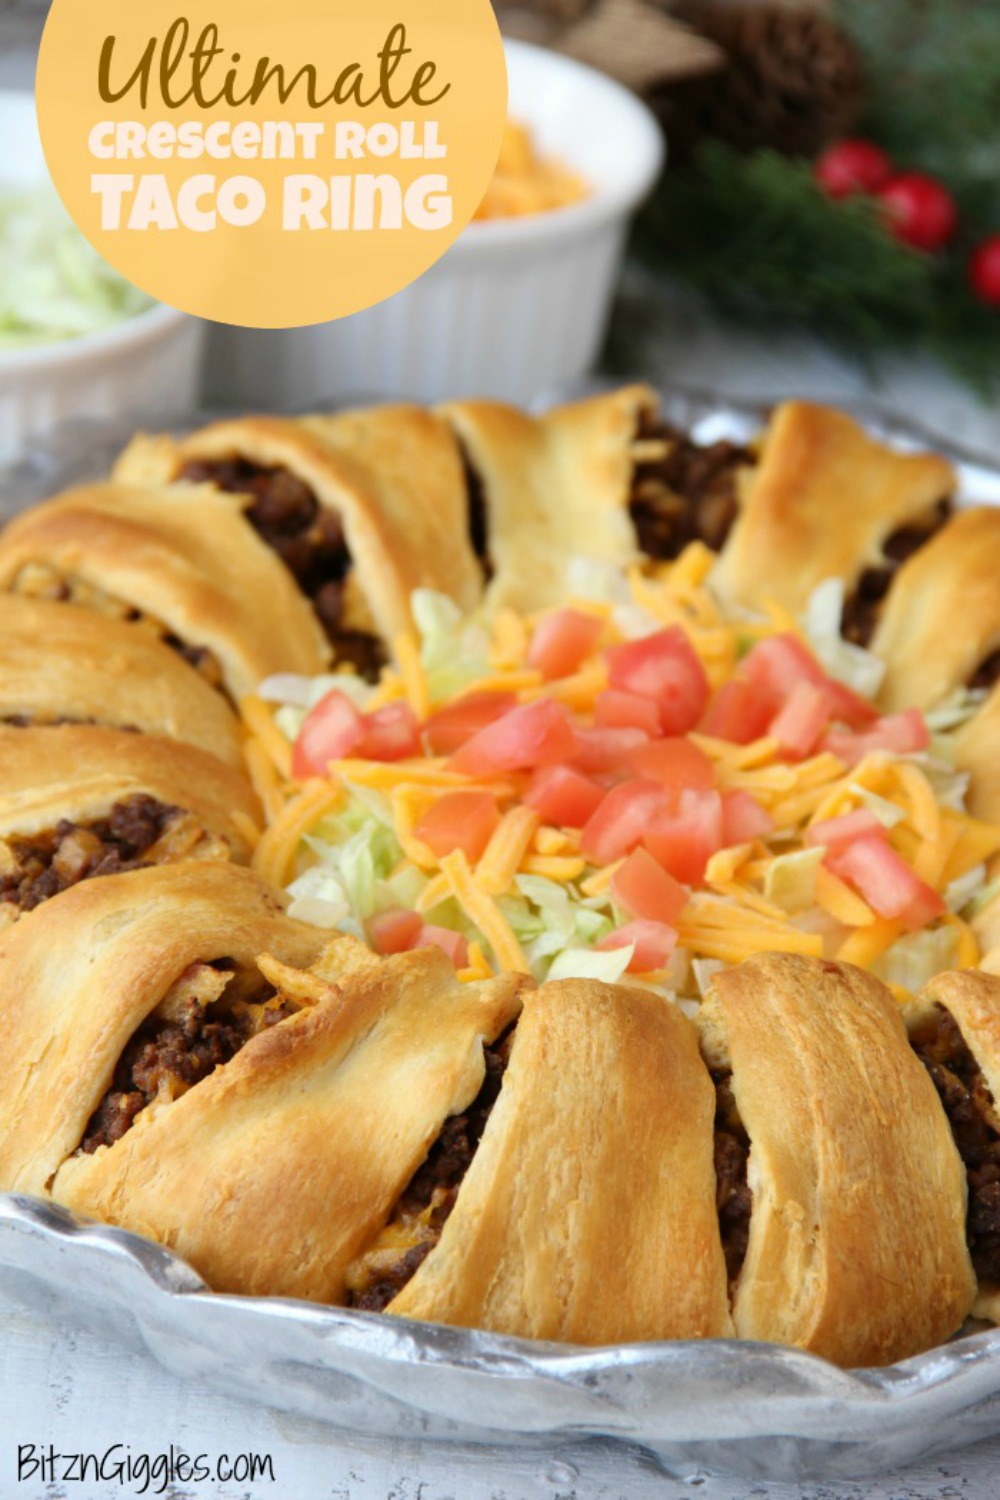 Ultimate Crescent Roll Taco Ring - This isn't just any old taco ring, it's filled with corn chips, guacamole, sour cream, cheese and tomatoes - easy and delicious, ready to serve a crowd! 